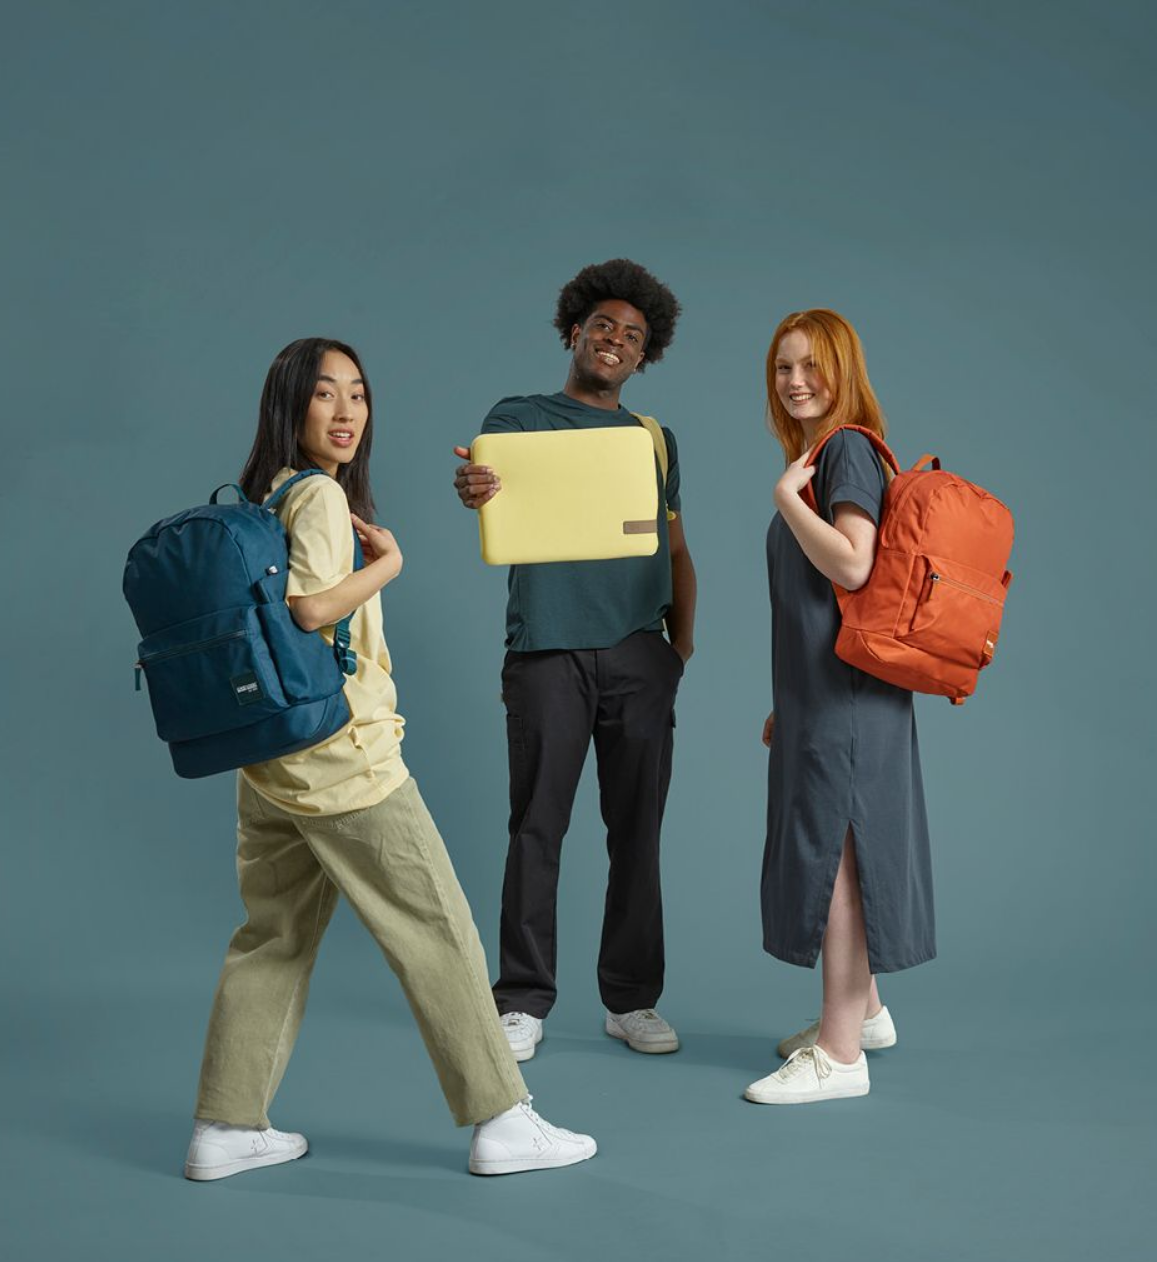 Three people standing in a circle, two have backpacks and one is holding a laptopsleeve.